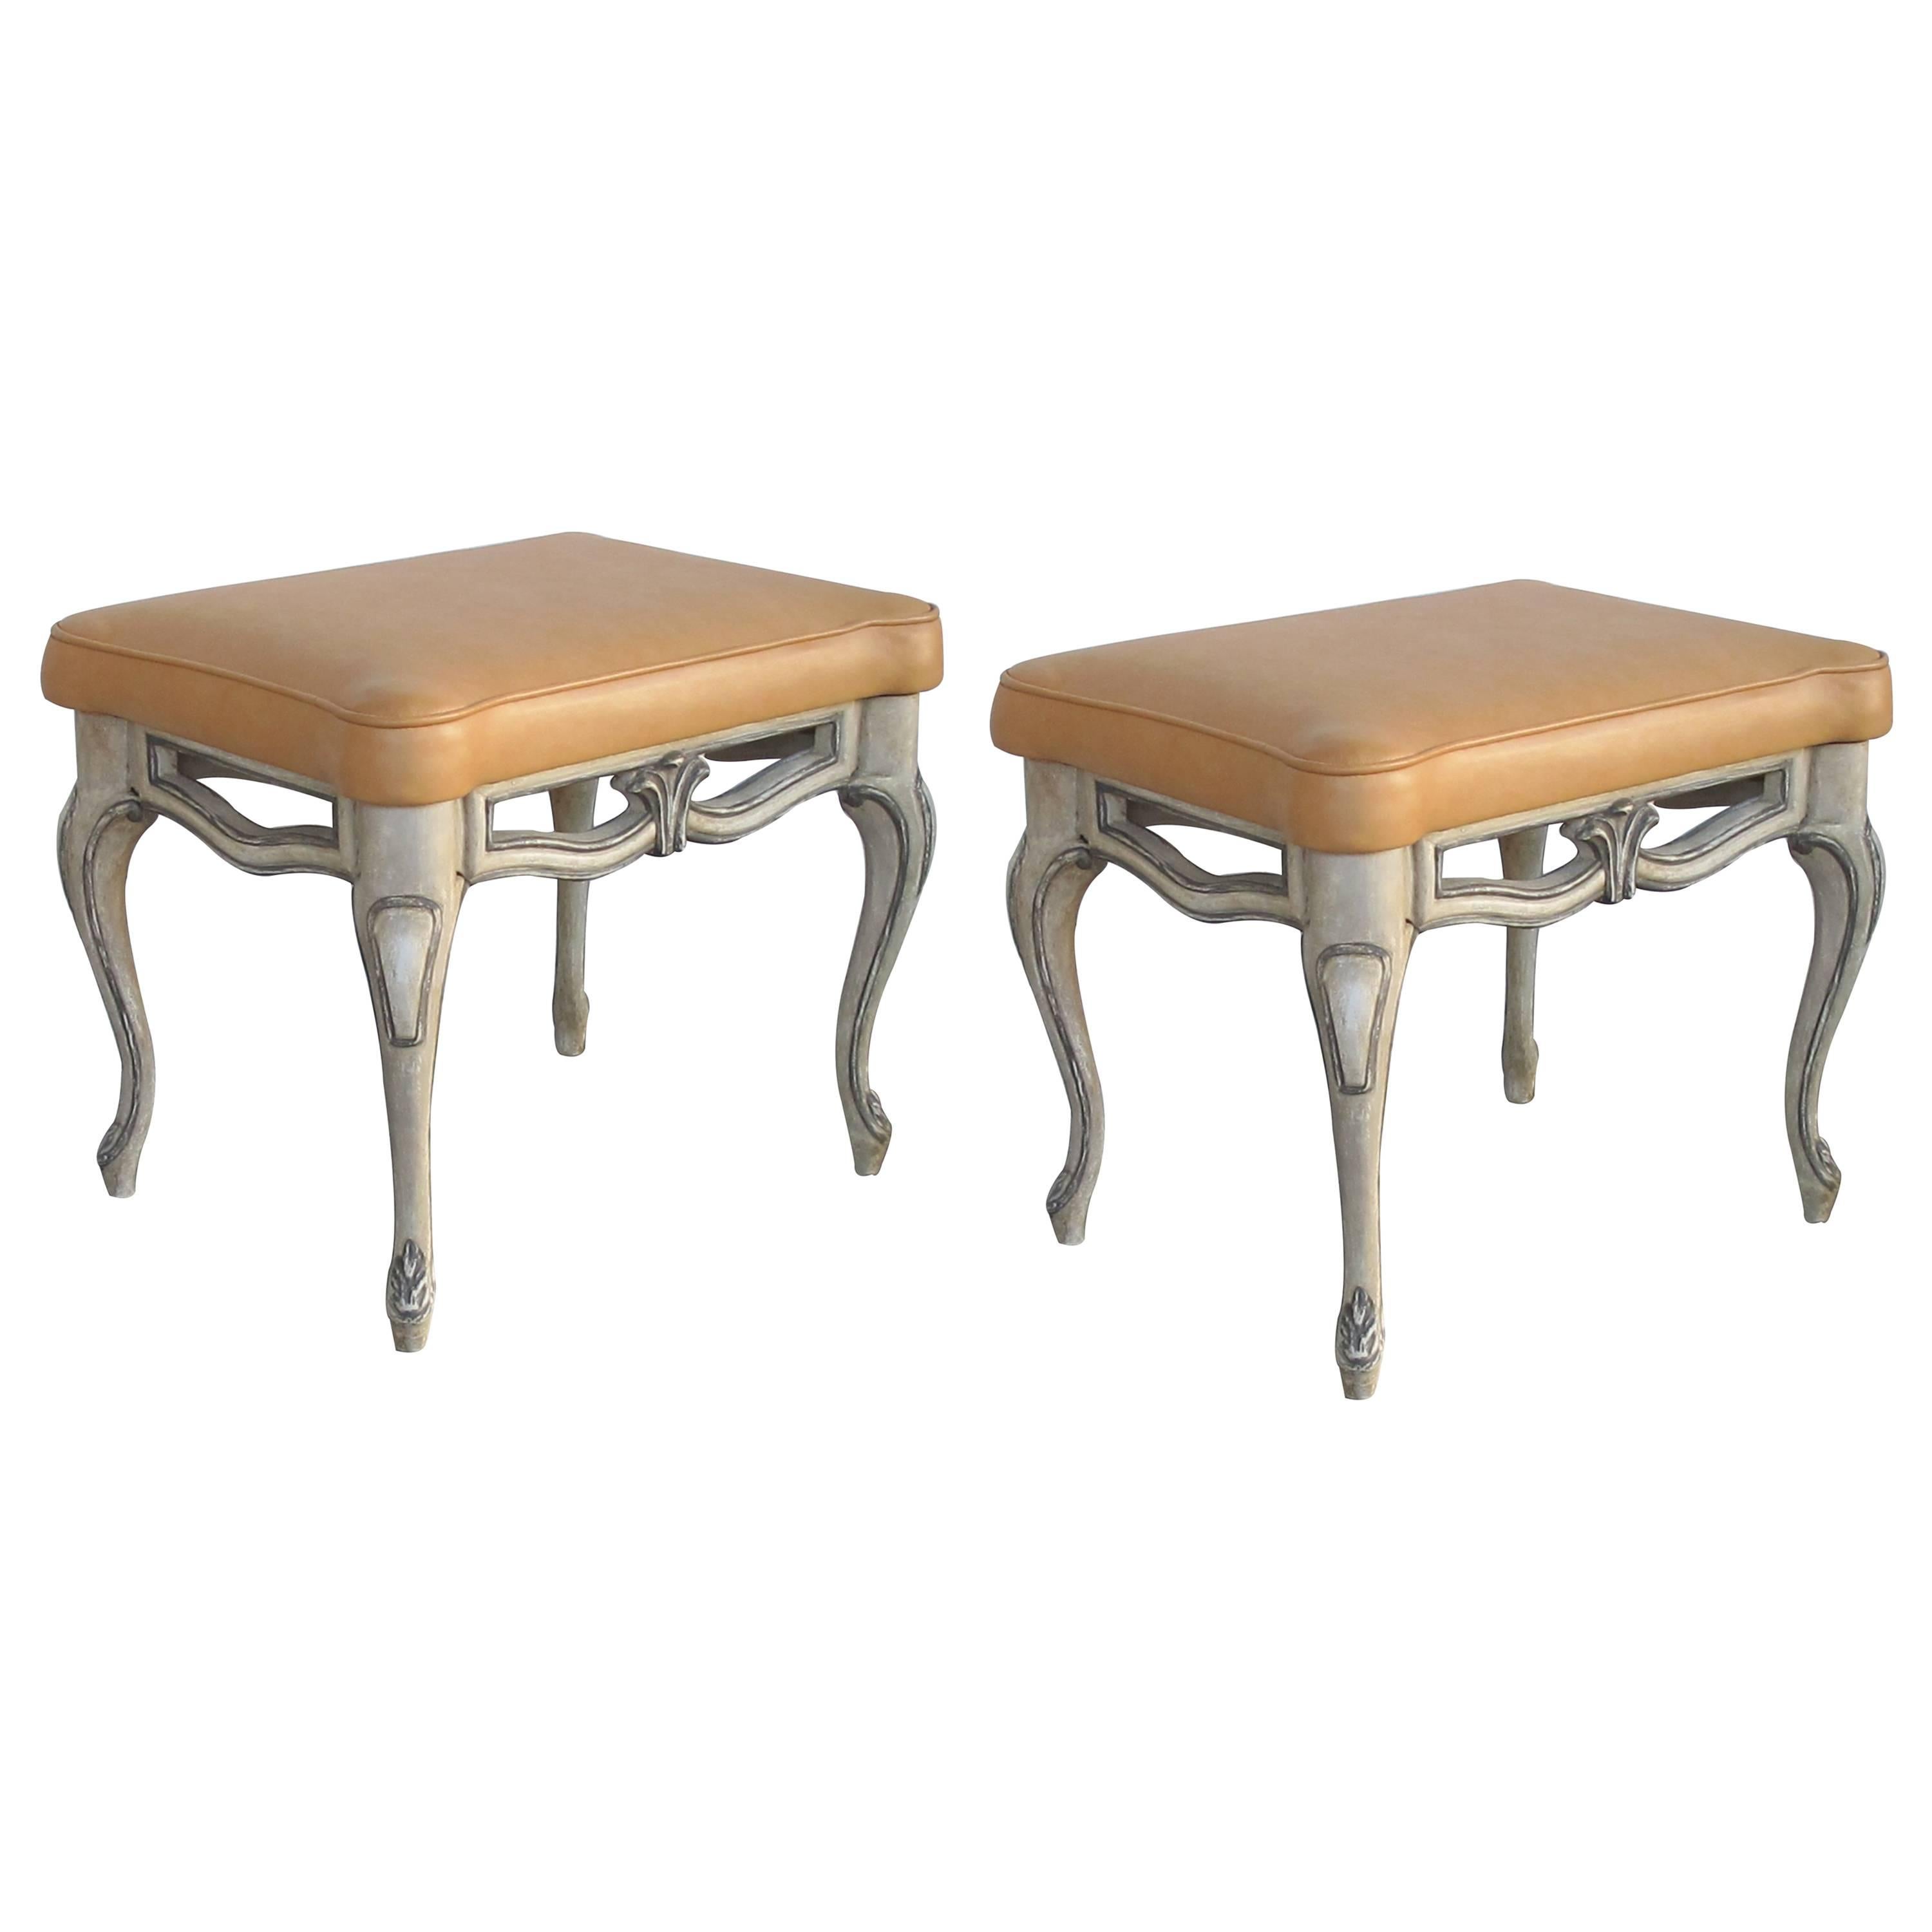 Gracefully-Shaped Pair of French Rococo Style Gray Painted Stools